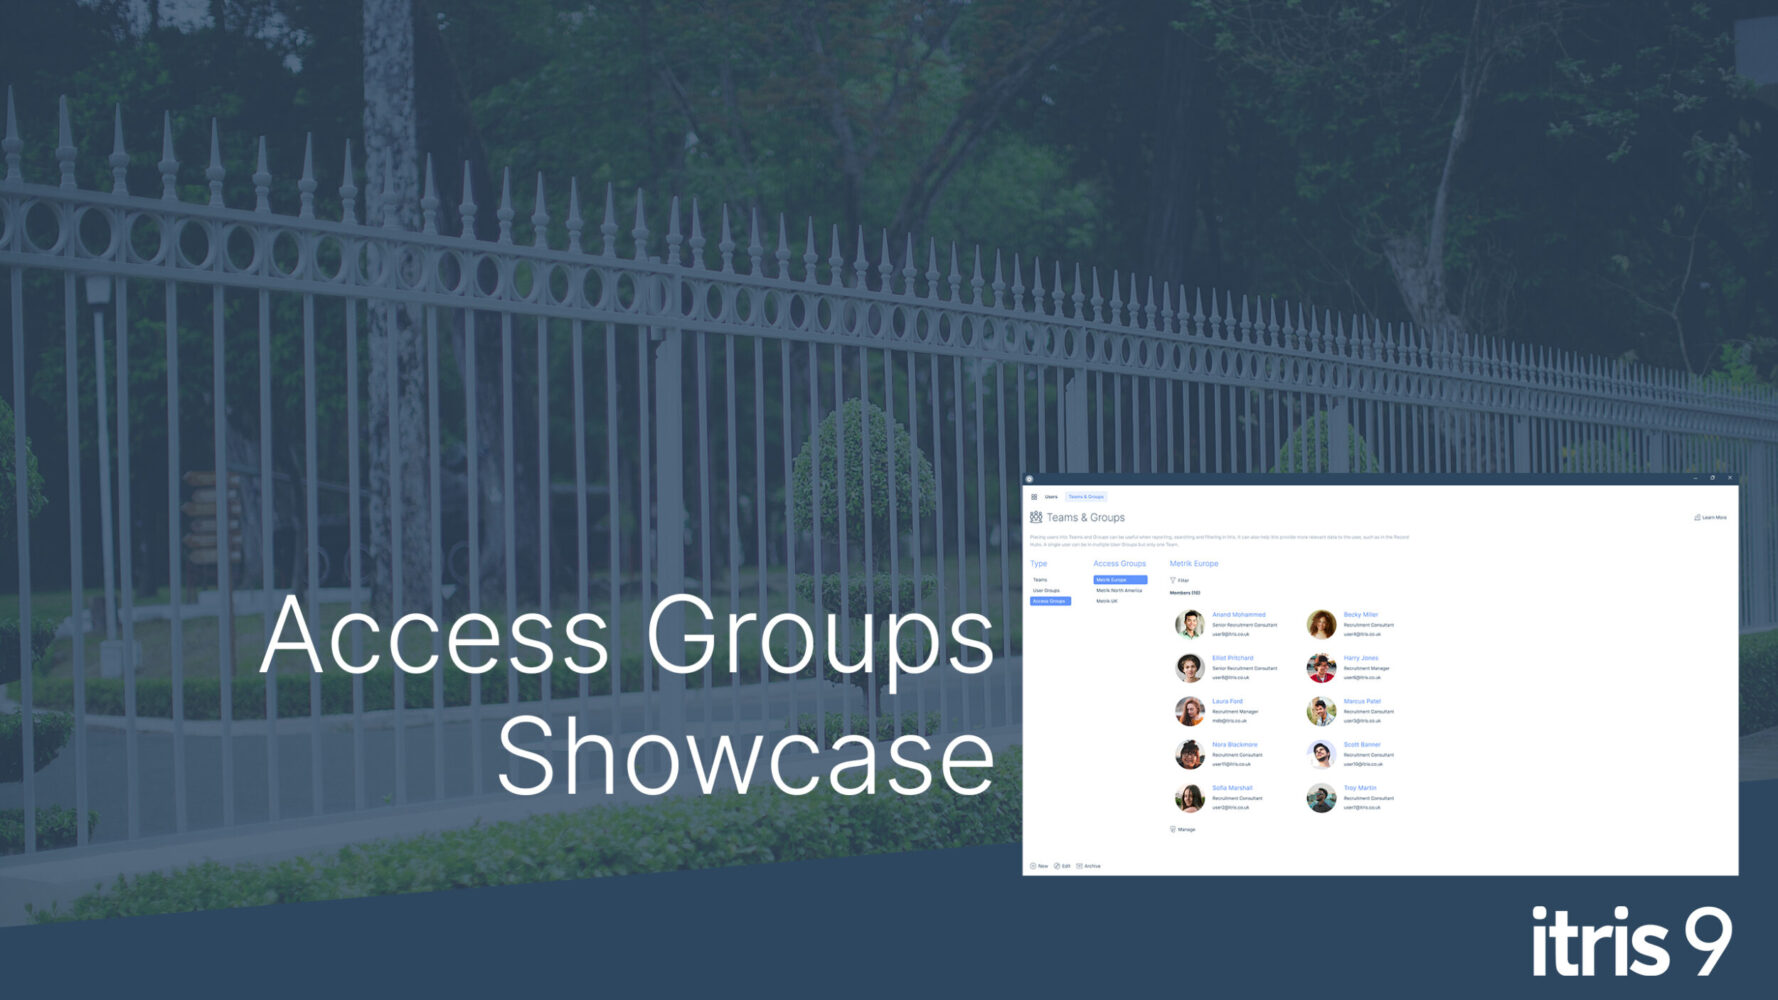 Recruitment CRM software itris 9 - Access Groups showcase Video